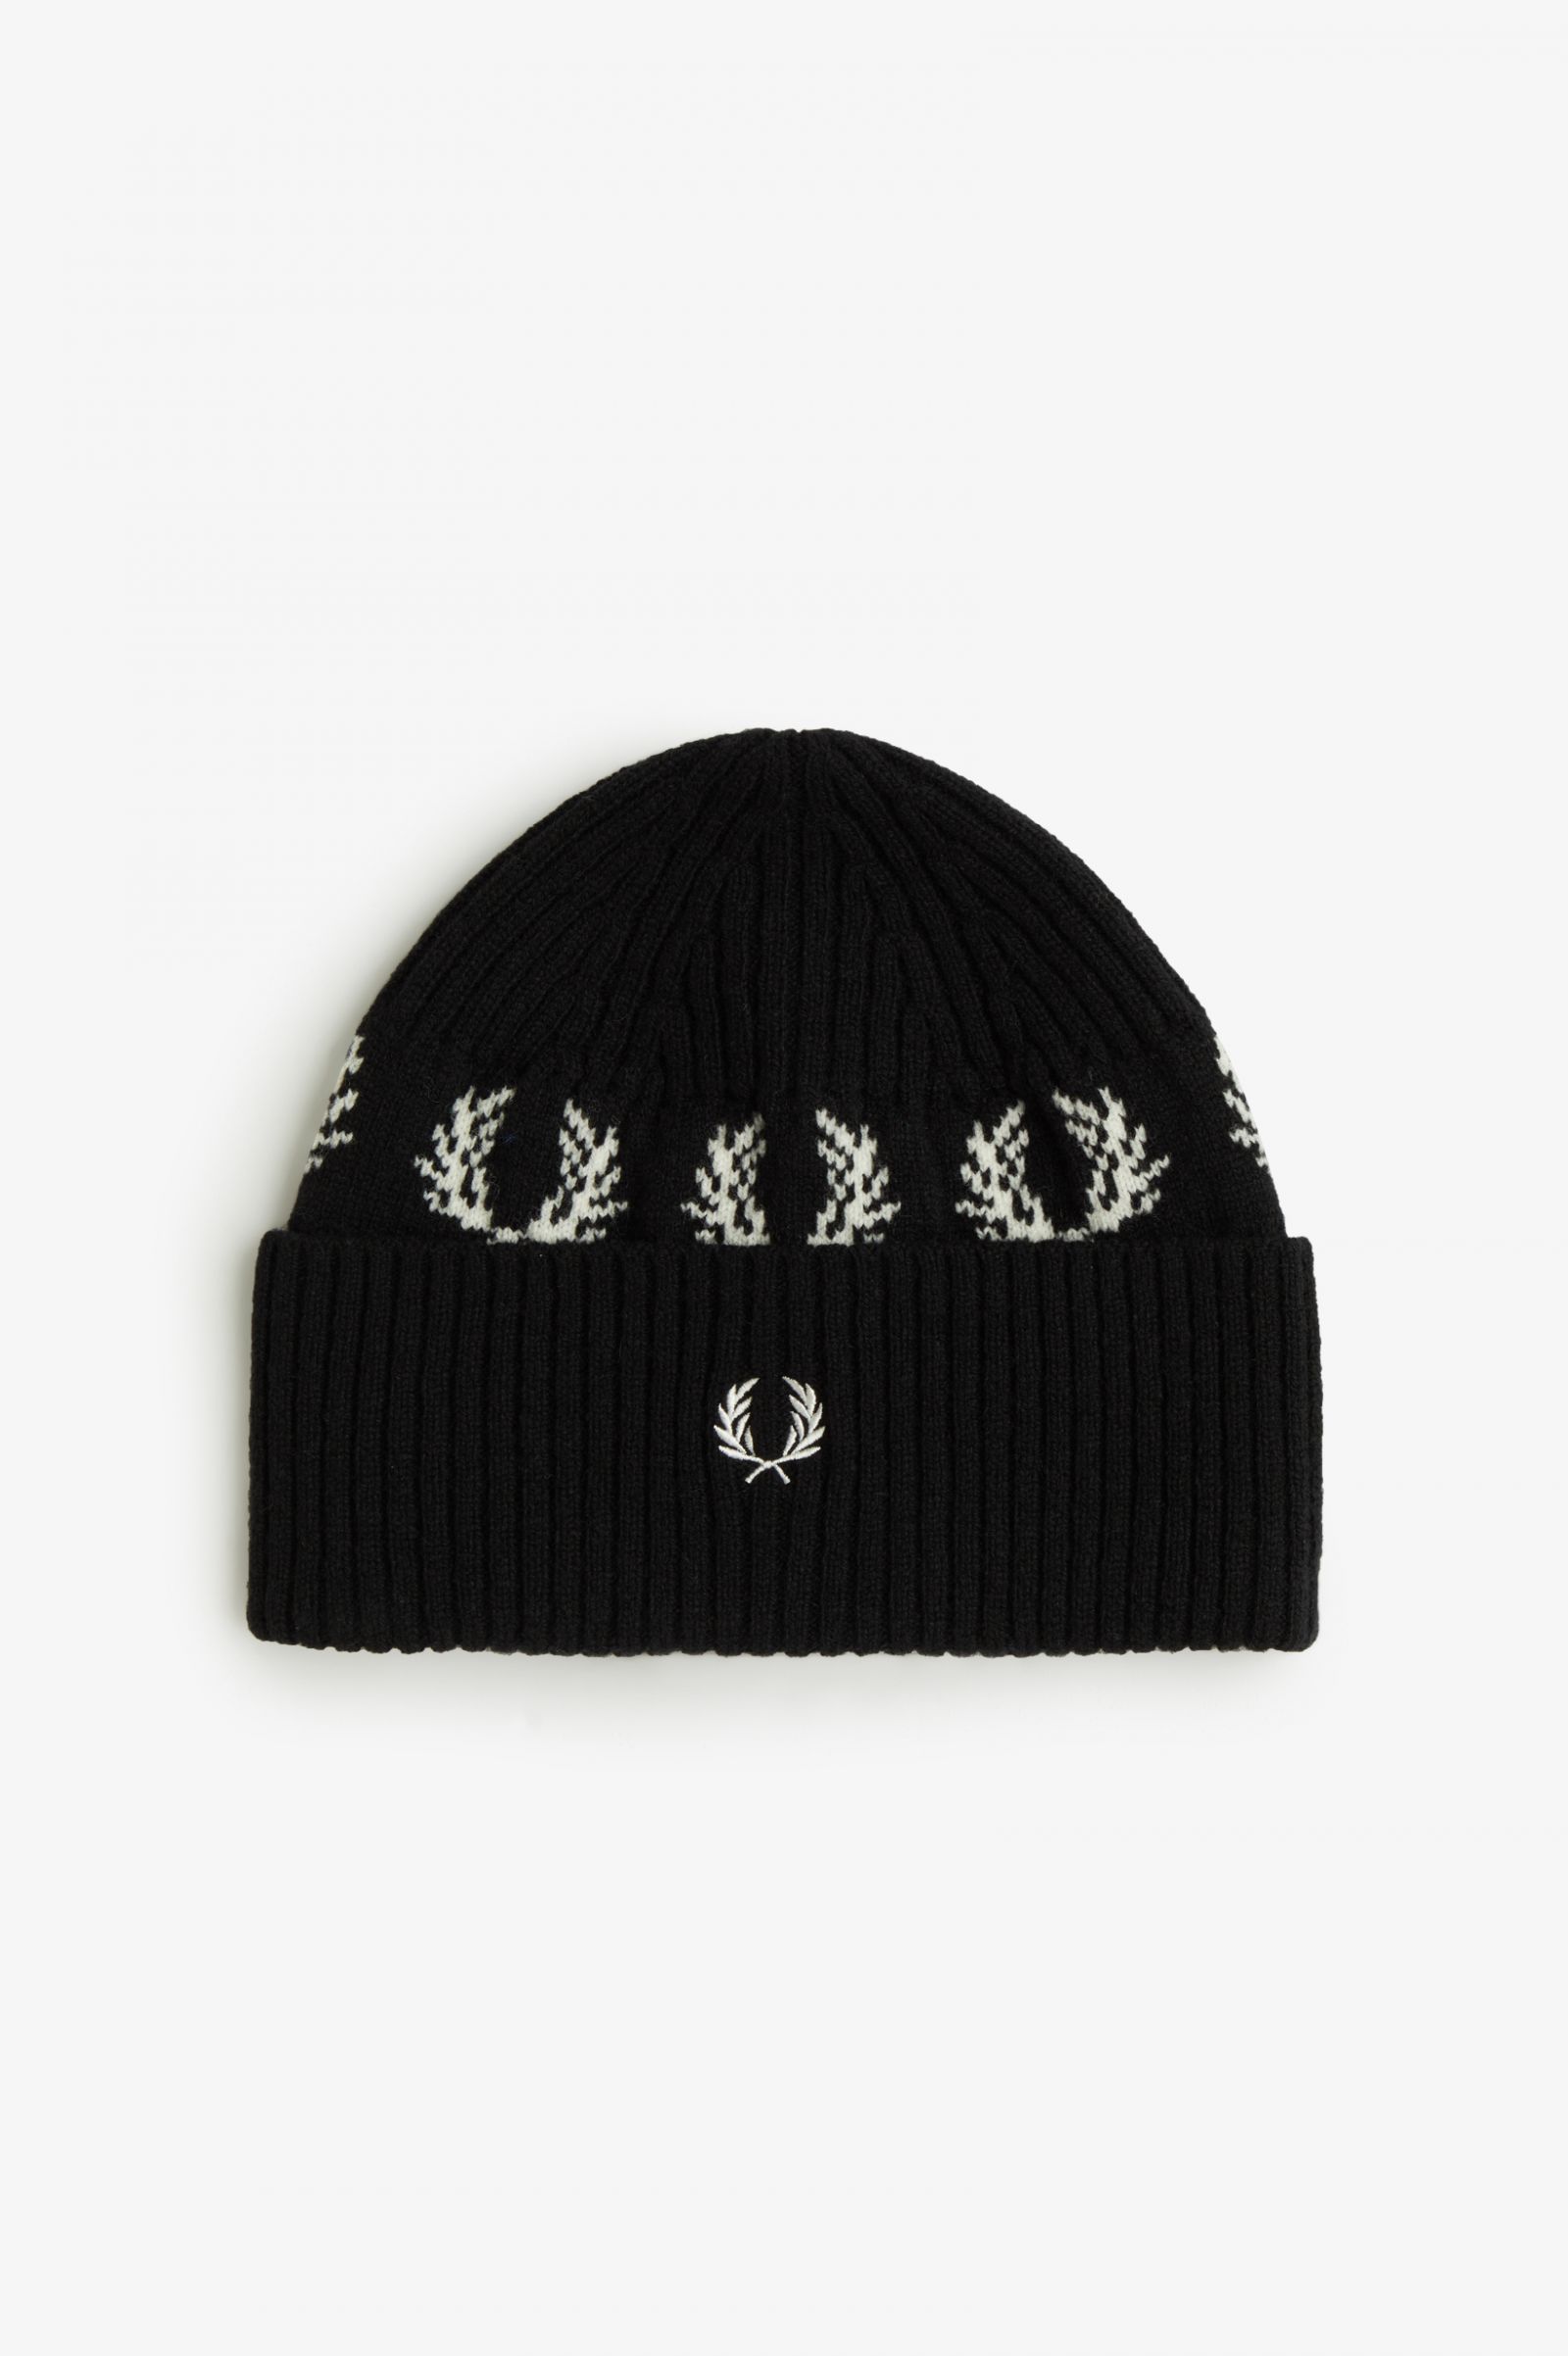 Laurel Wreath Lambswool Snow Hats, White Perry | | Fred Wallets, - Accessories Beanie Socks Black | / Purses, US & Jewellery